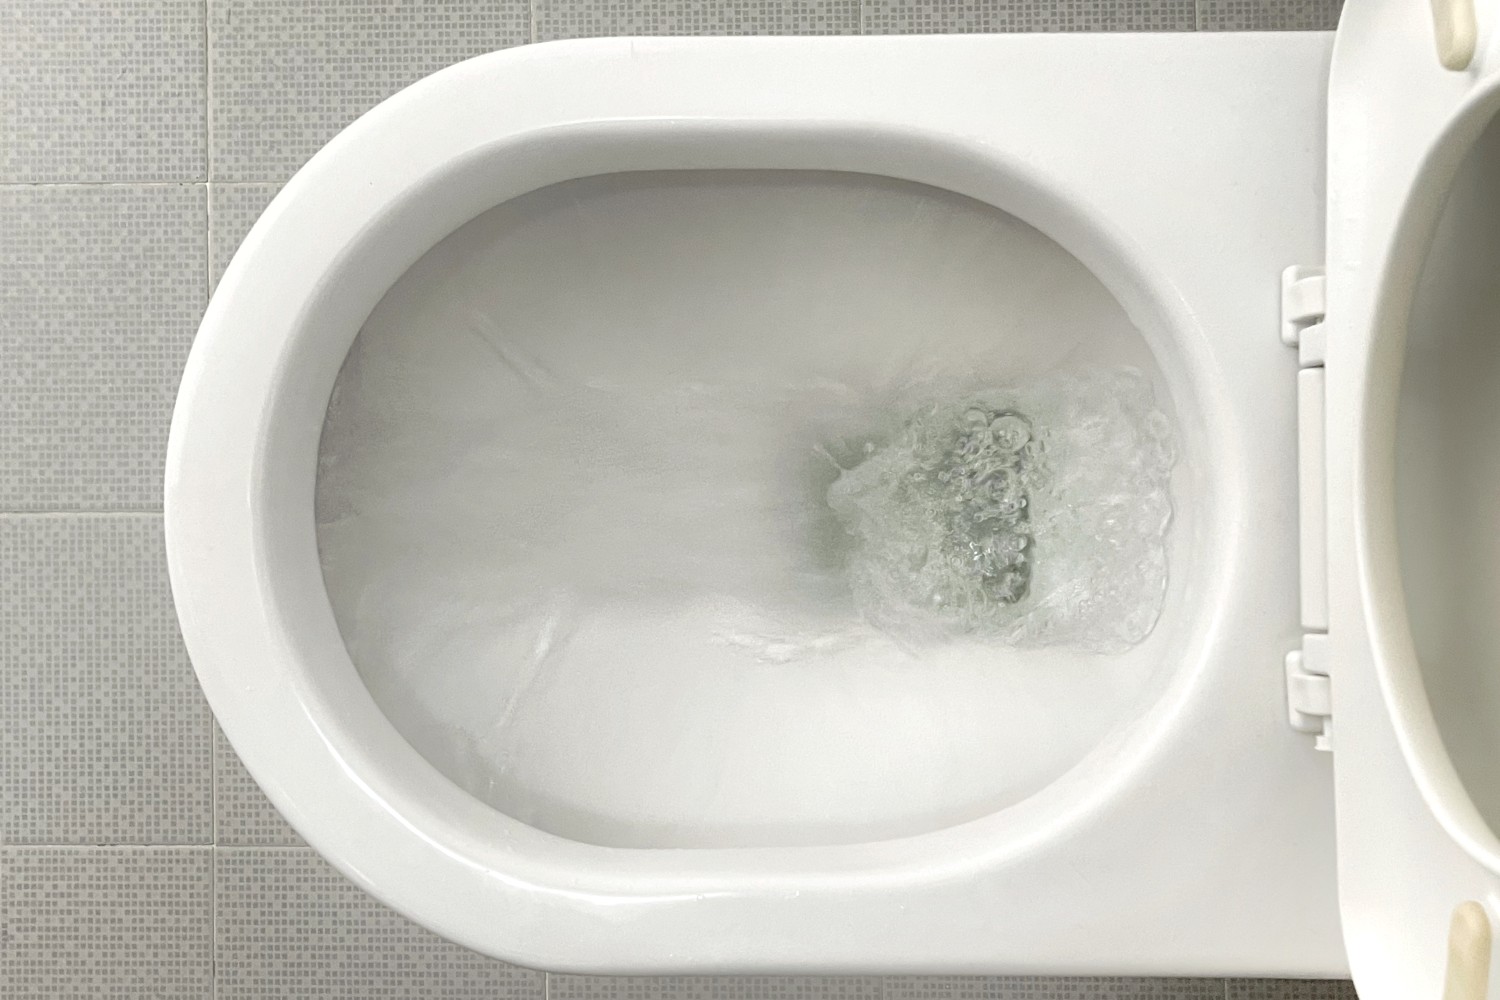 FDA Cracks Down on the Gray Market for Human Poop